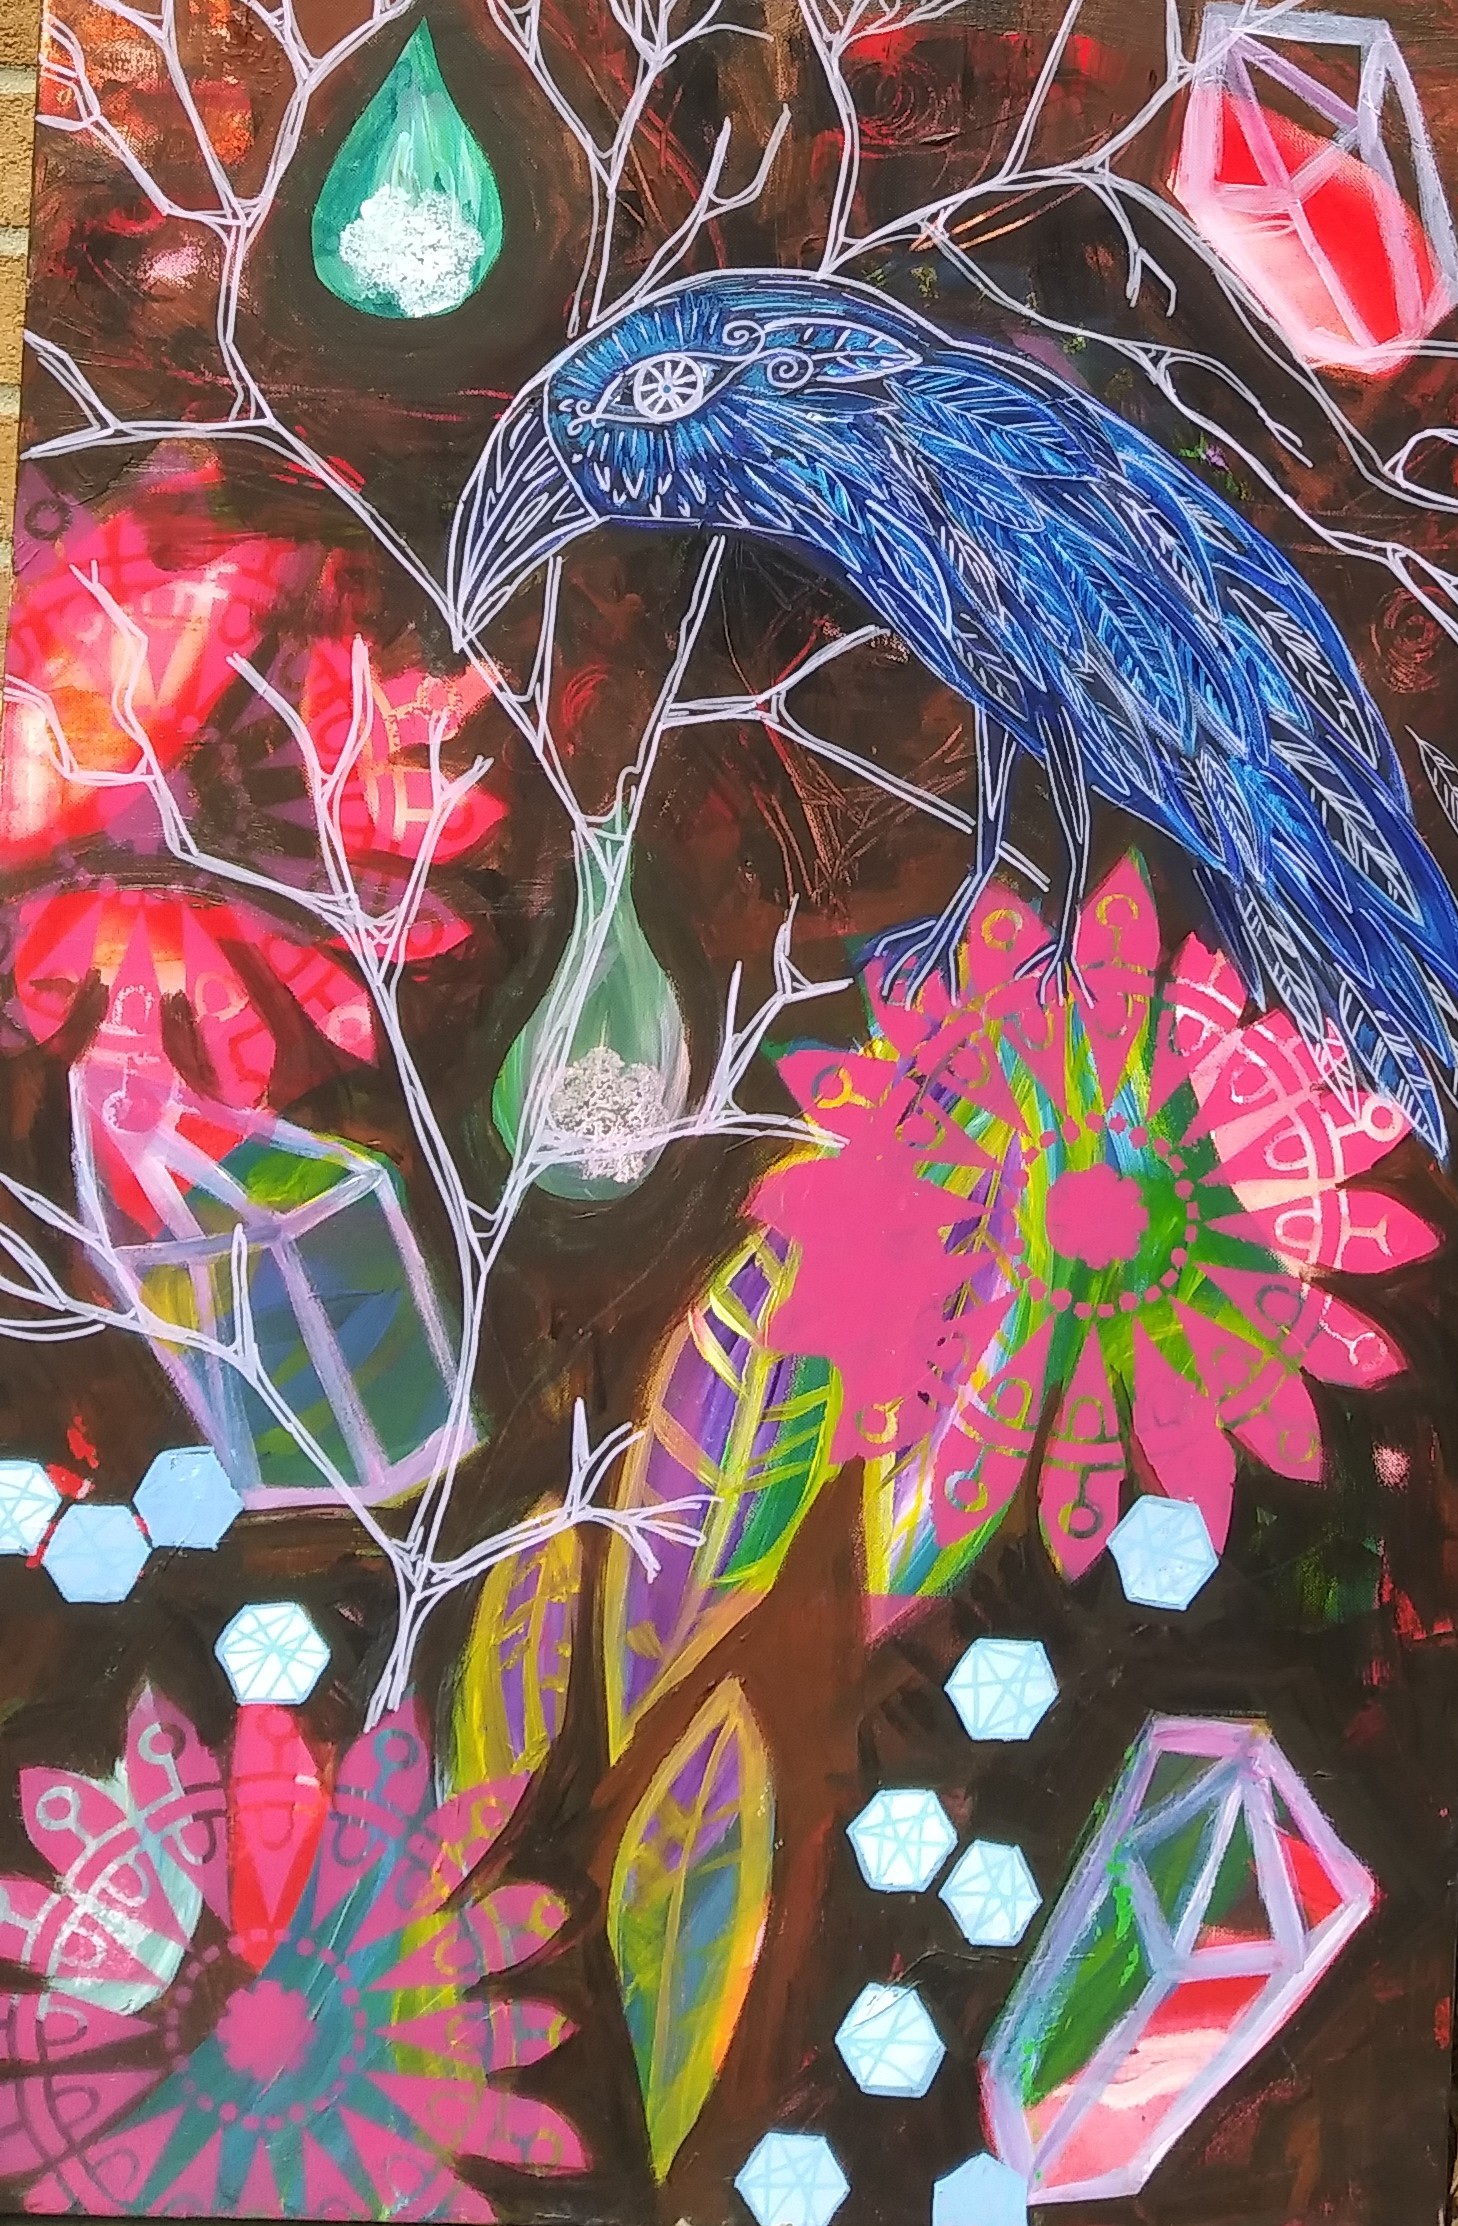 In this painting the background is dark like burnt umber, very deep brown. Floating on top are abstracted images of crystals in bright colors like pink and green outlined in light purple. There are white tree branches drawn in thin lines where a crow sits. The crow is dark blue with white details outlining his feathers and features. Scattered throughout the painting are flowers in bright pink with the pattern of a mandala making their design. Also floating throughout the painting are leaves that also have abstract colors composing their design